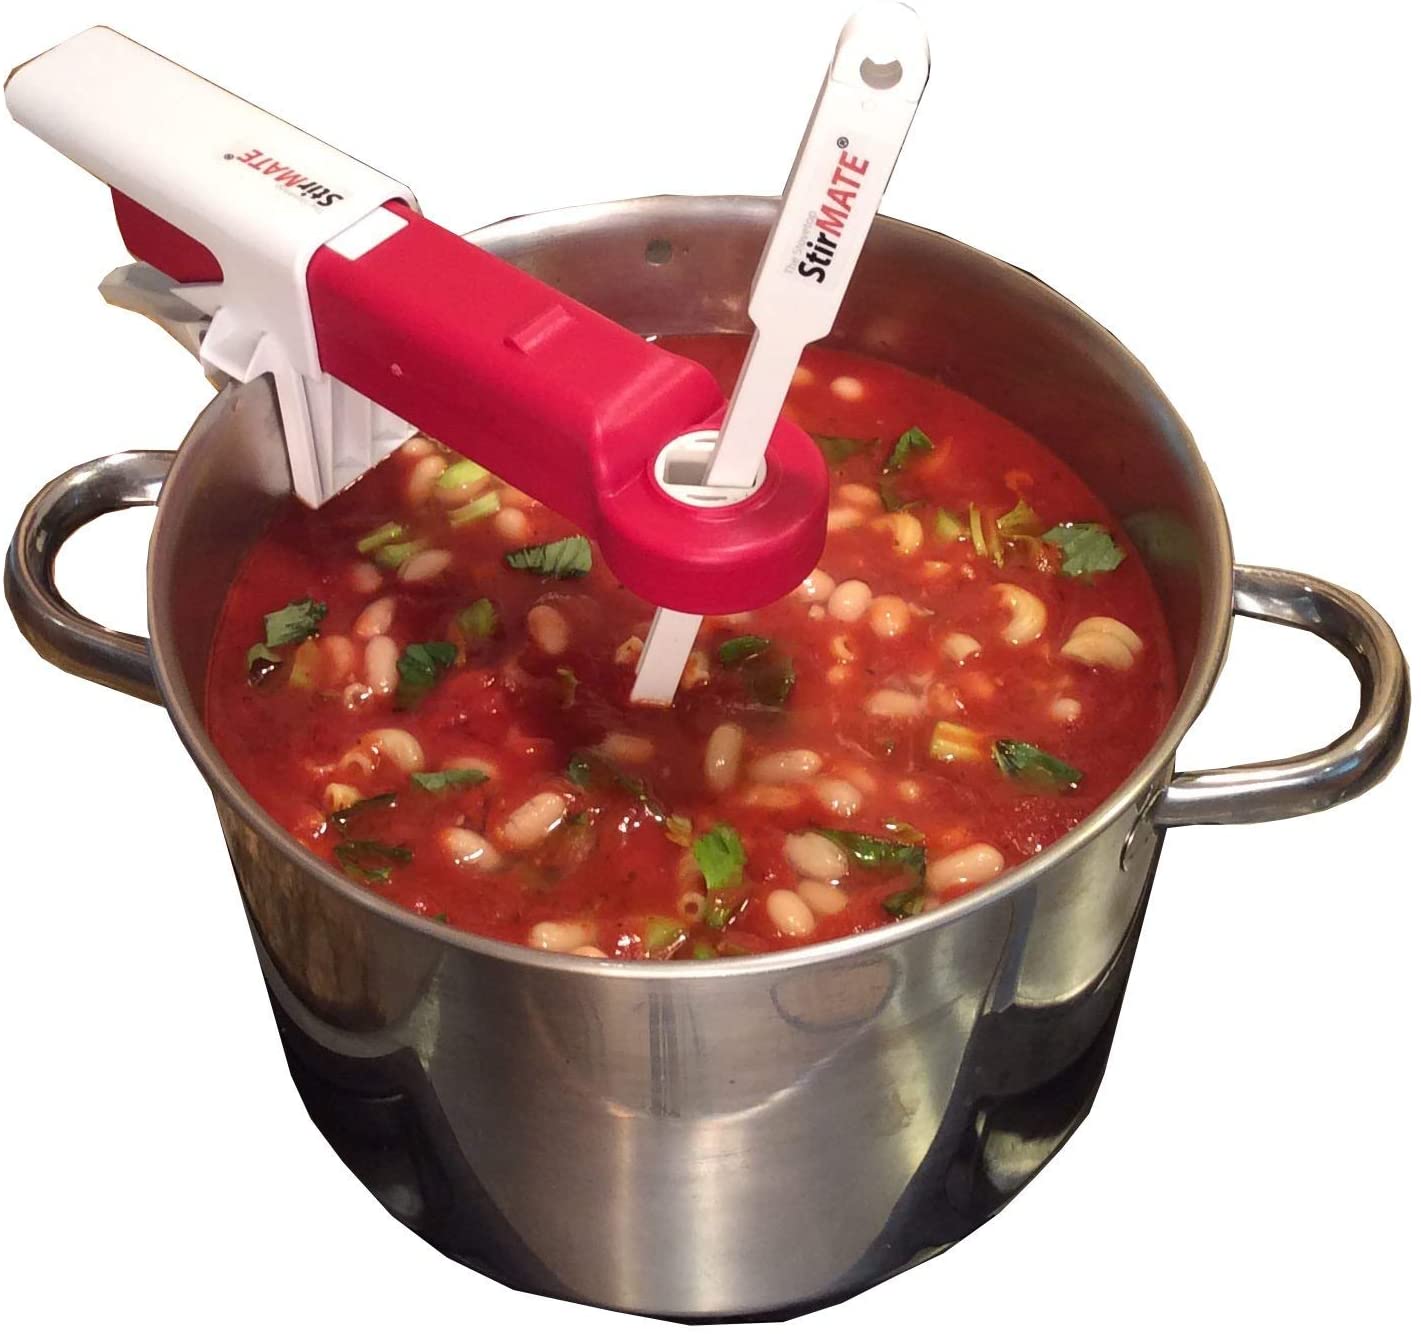 https://www.wideopencountry.com/wp-content/uploads/sites/4/eats/2021/06/StirMATE-VS-Automatic-Pot-Stirrer-Variable-Speed-Self-Adjusting-Powerful-Quiet-Cordless-UPDATED-2021-.jpg?resize=1421%2C1334